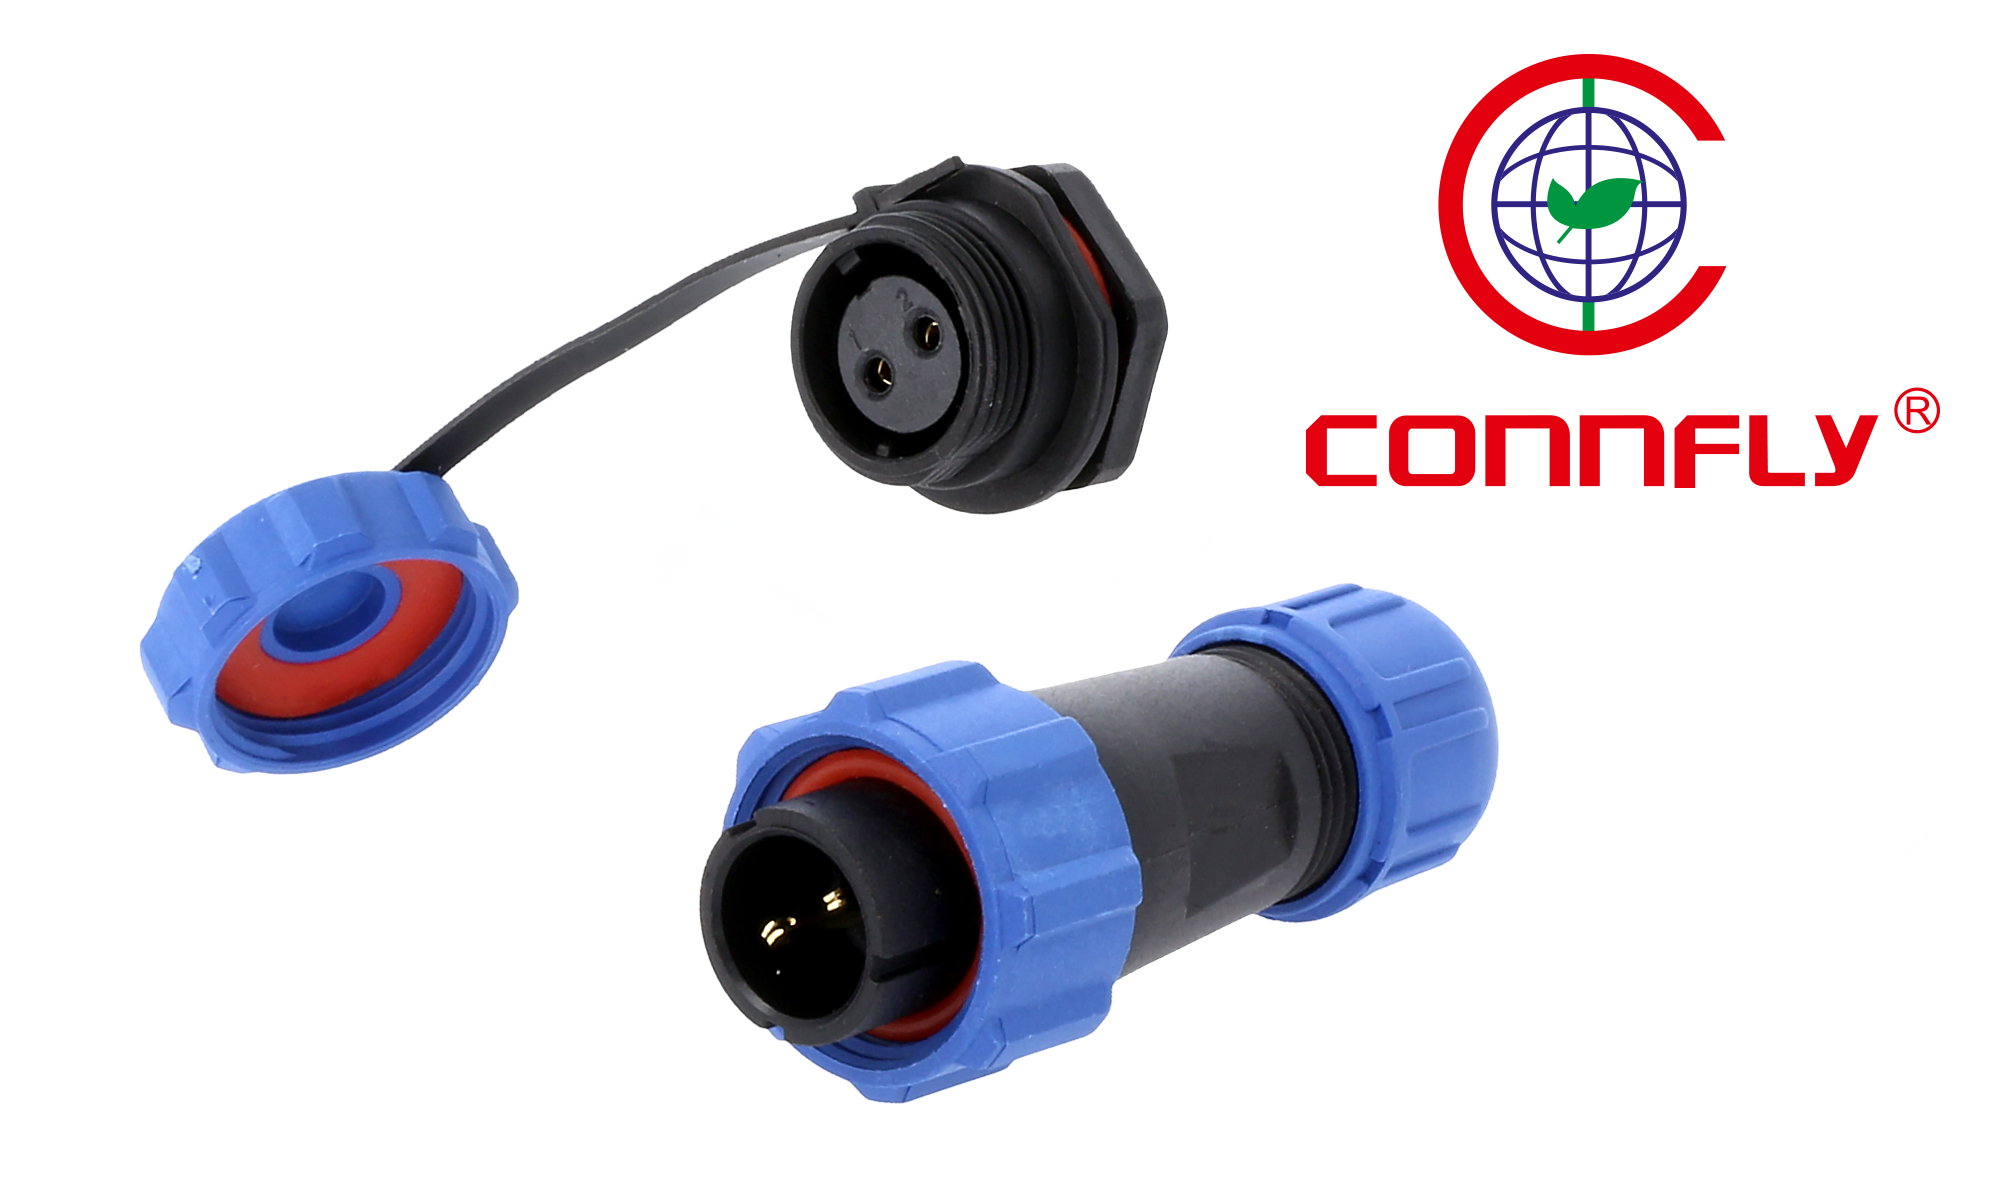 Waterproof connector kits offered by Connfly